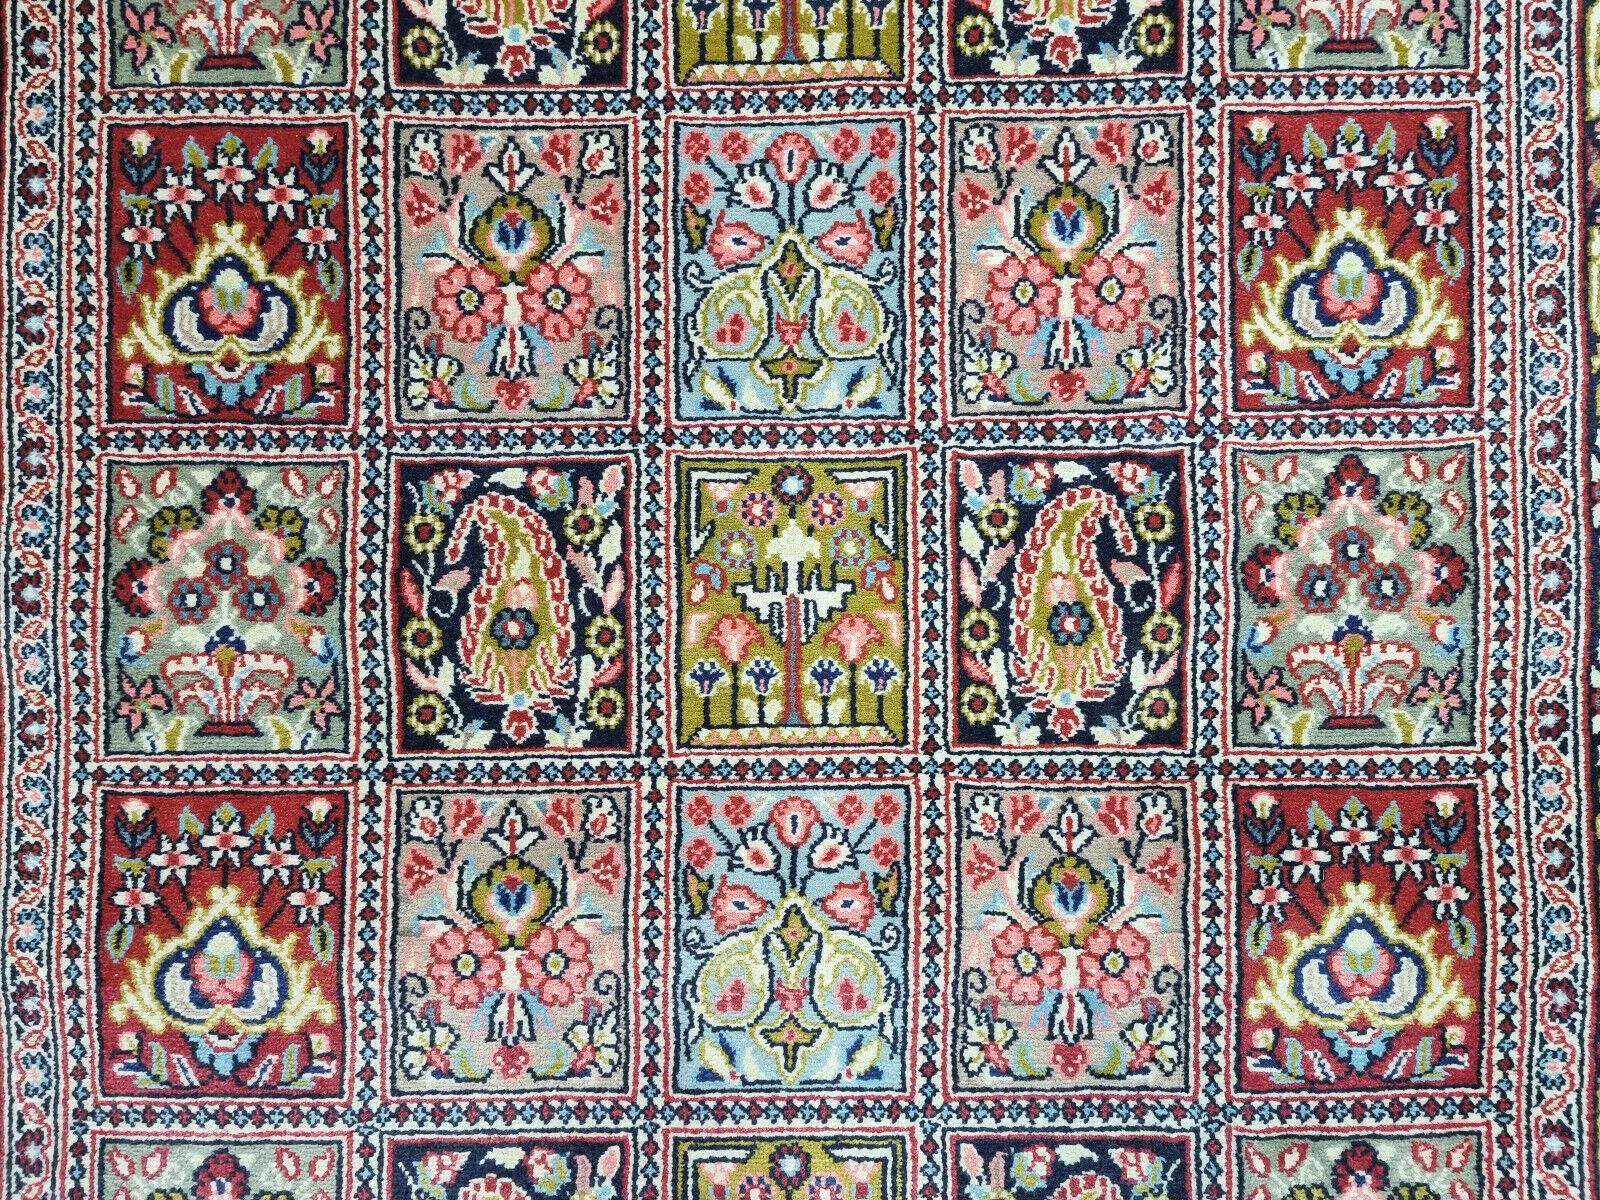 Wool Handmade Vintage Persian Style Qum Rug 3.6' x 5.1', 1970s - 1D87 For Sale